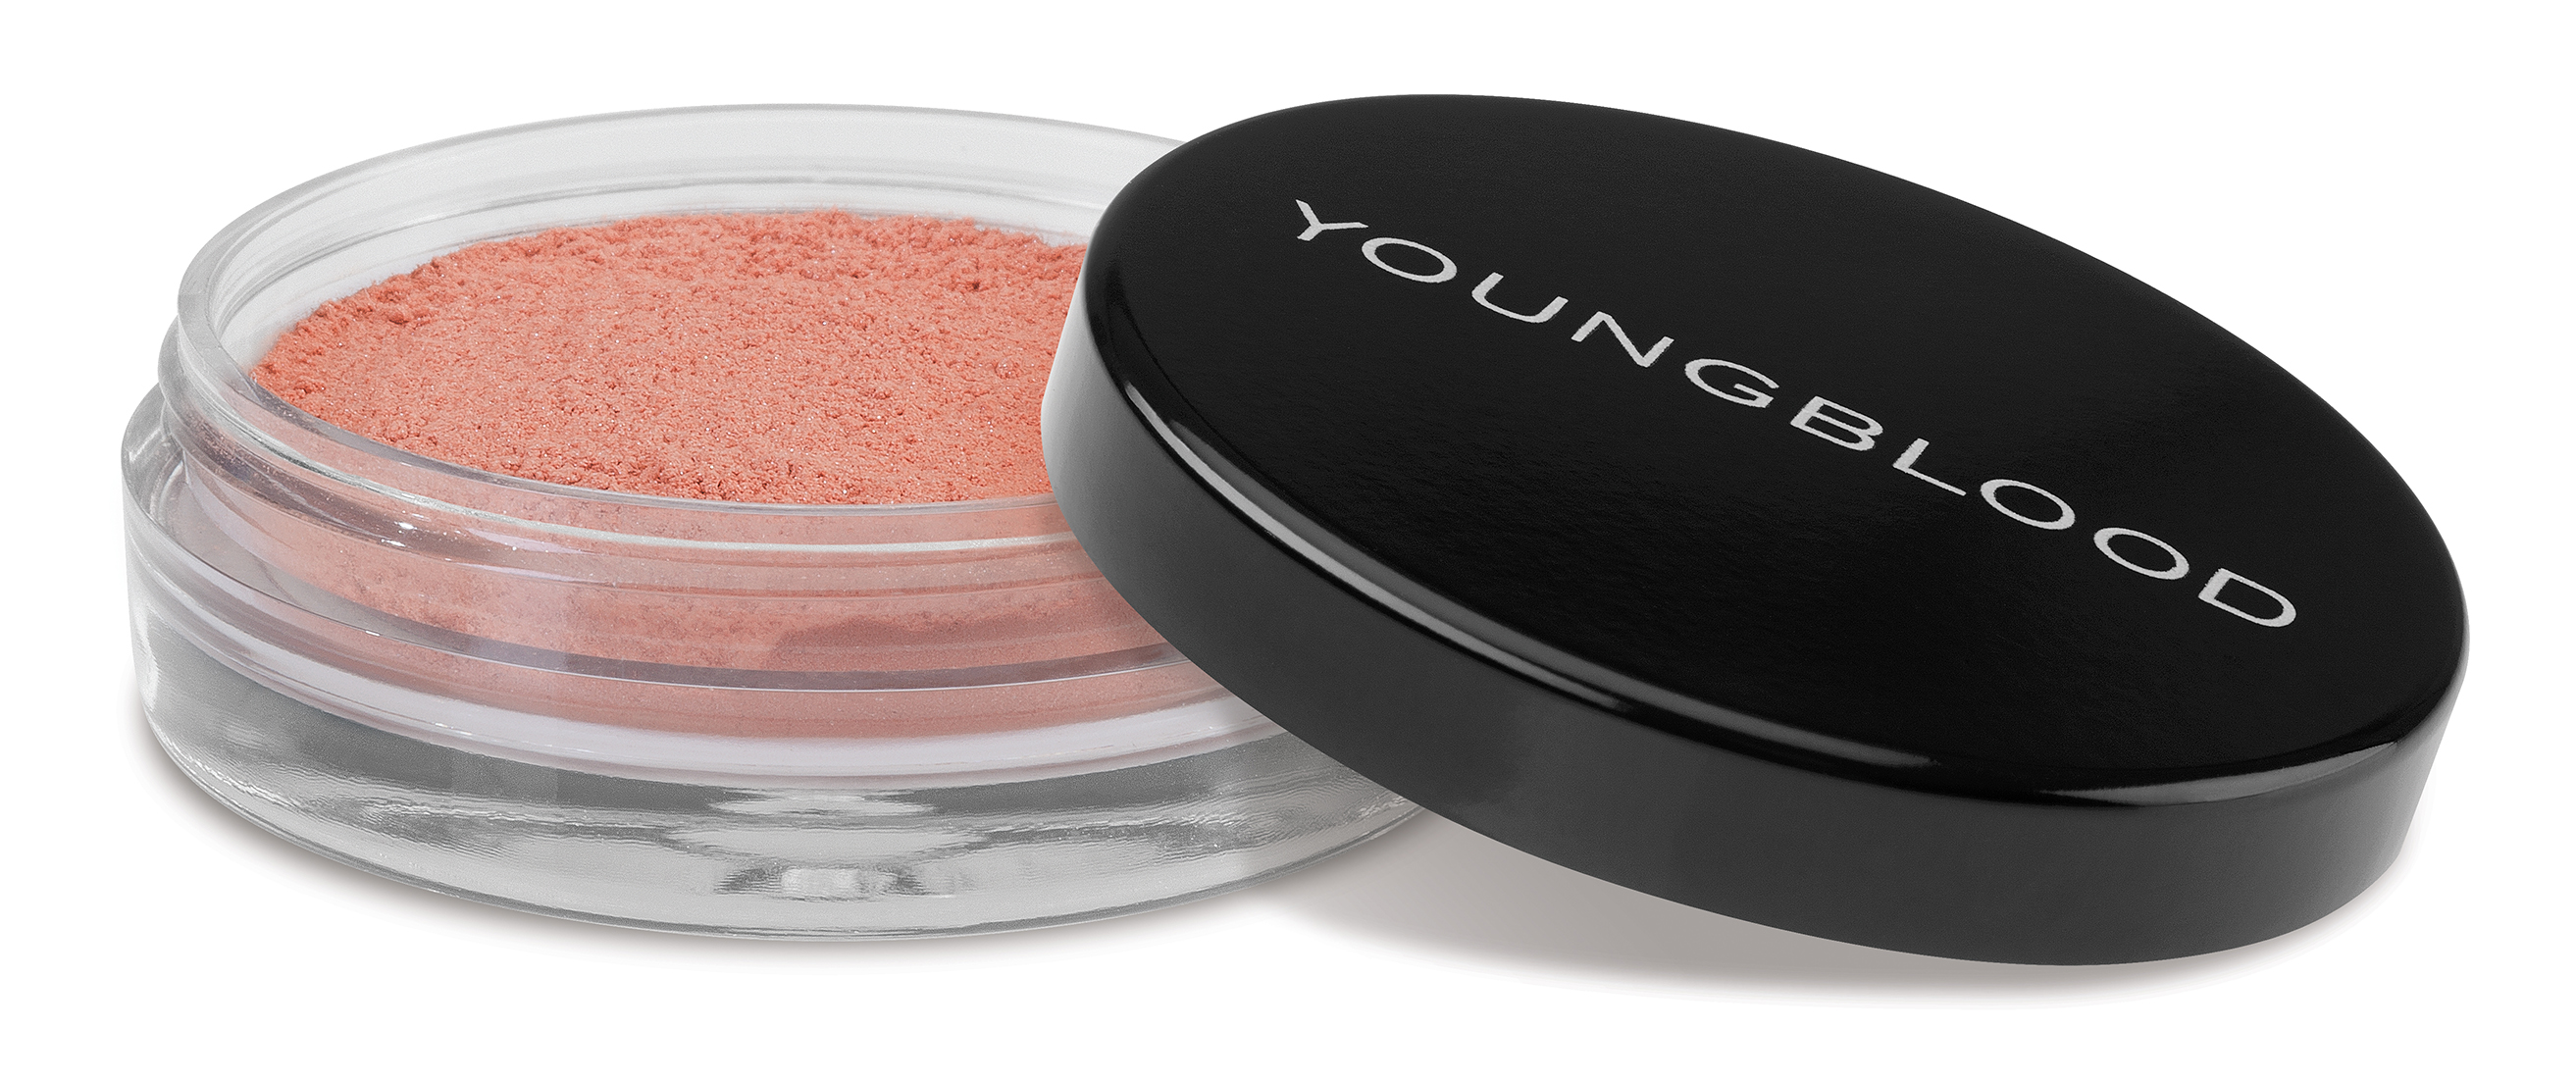 Youngblood Crushed Mineral Blush 02 Coral Reef